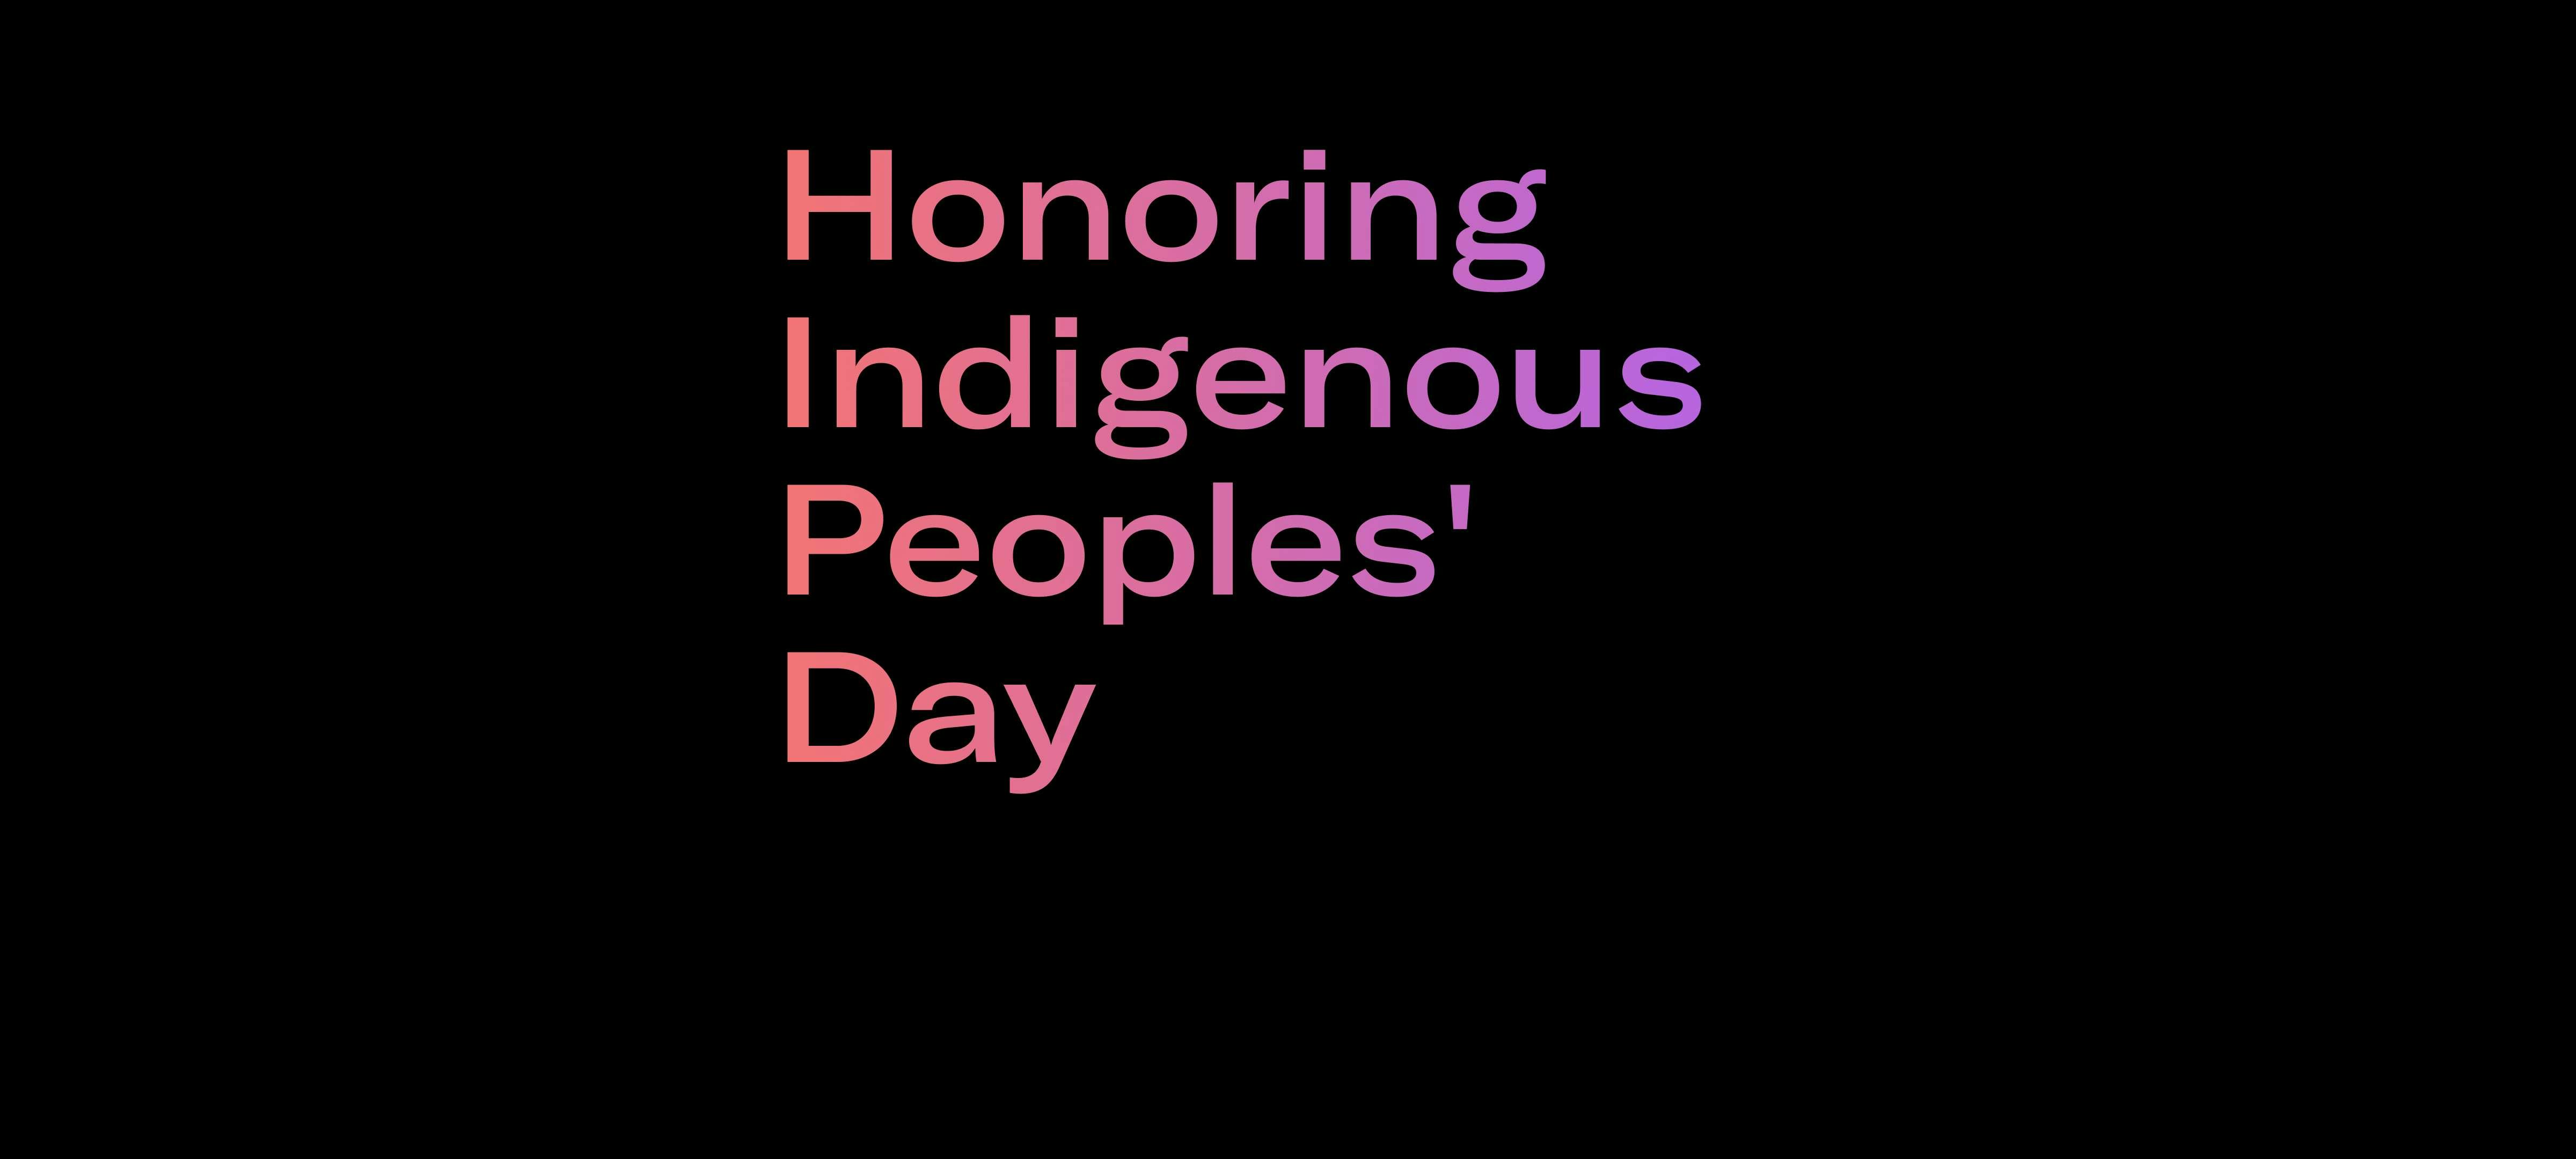 Honoring Indigenous Peoples' Day With Dance Church